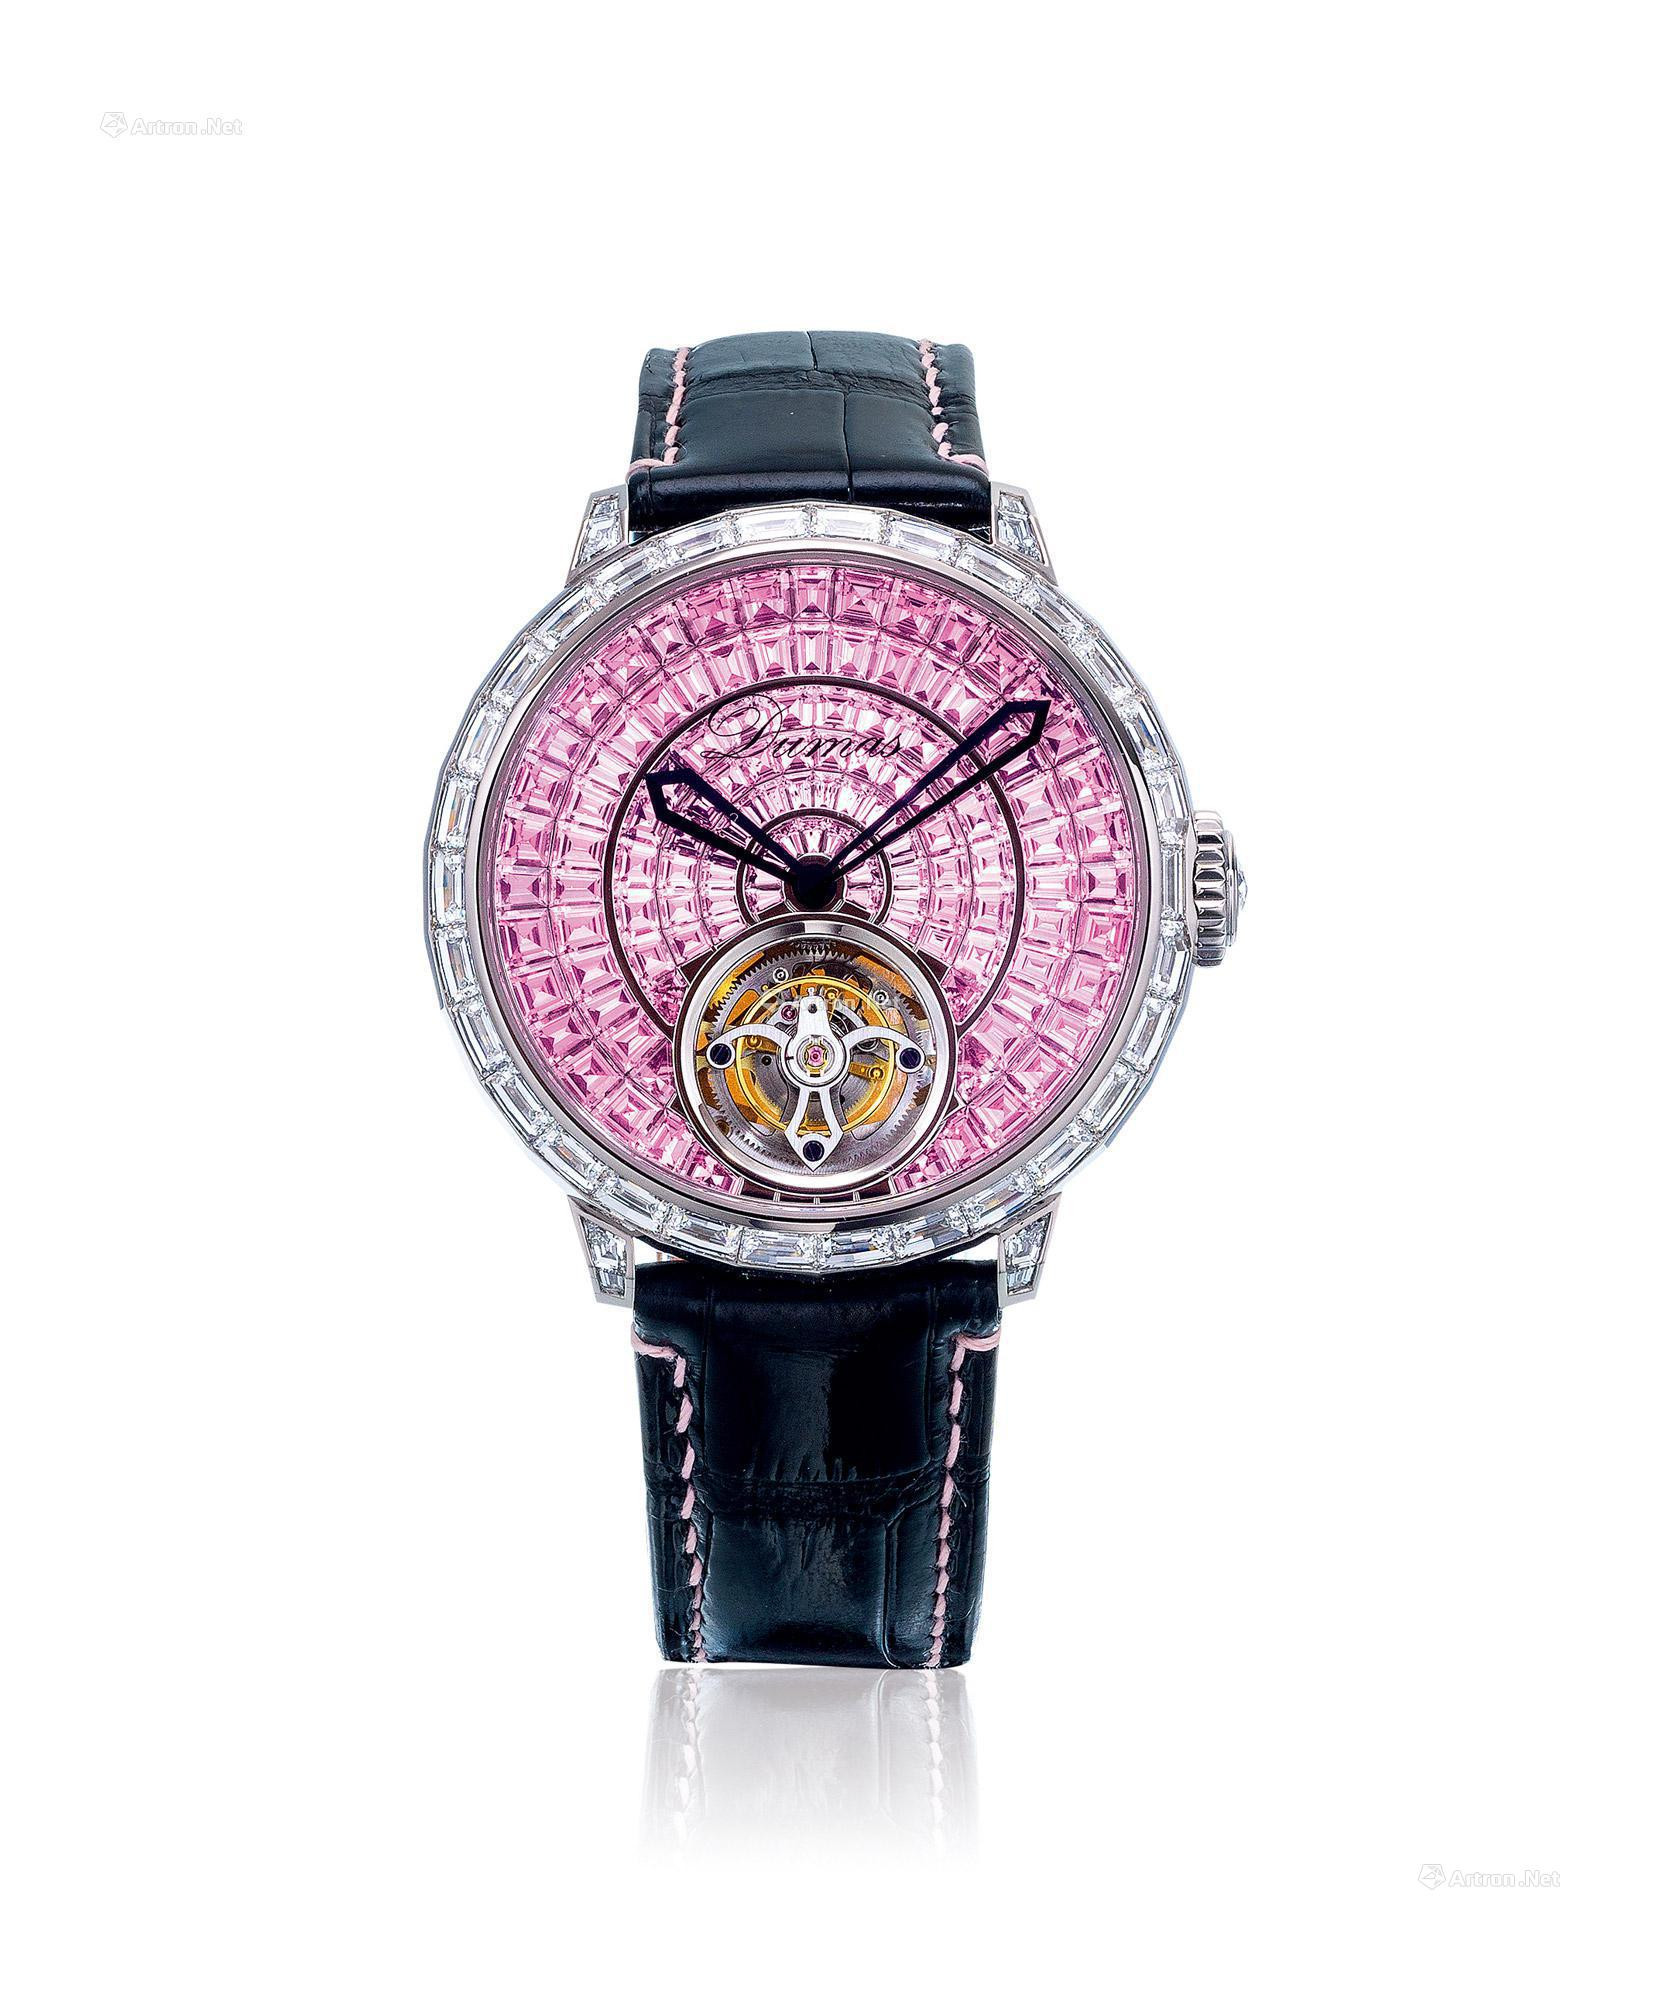 DUMAS  AN ATTRACTIVE AND FINE WHITE GOLD， BAGUETTE-CUT DIAMOND AND PINK SAPPHIRE-SET TOURBILLON AUTOMATIC WRISTWATCH， WITH CERTIFICATE OF ORIGIN AND PRESENTATION BOX